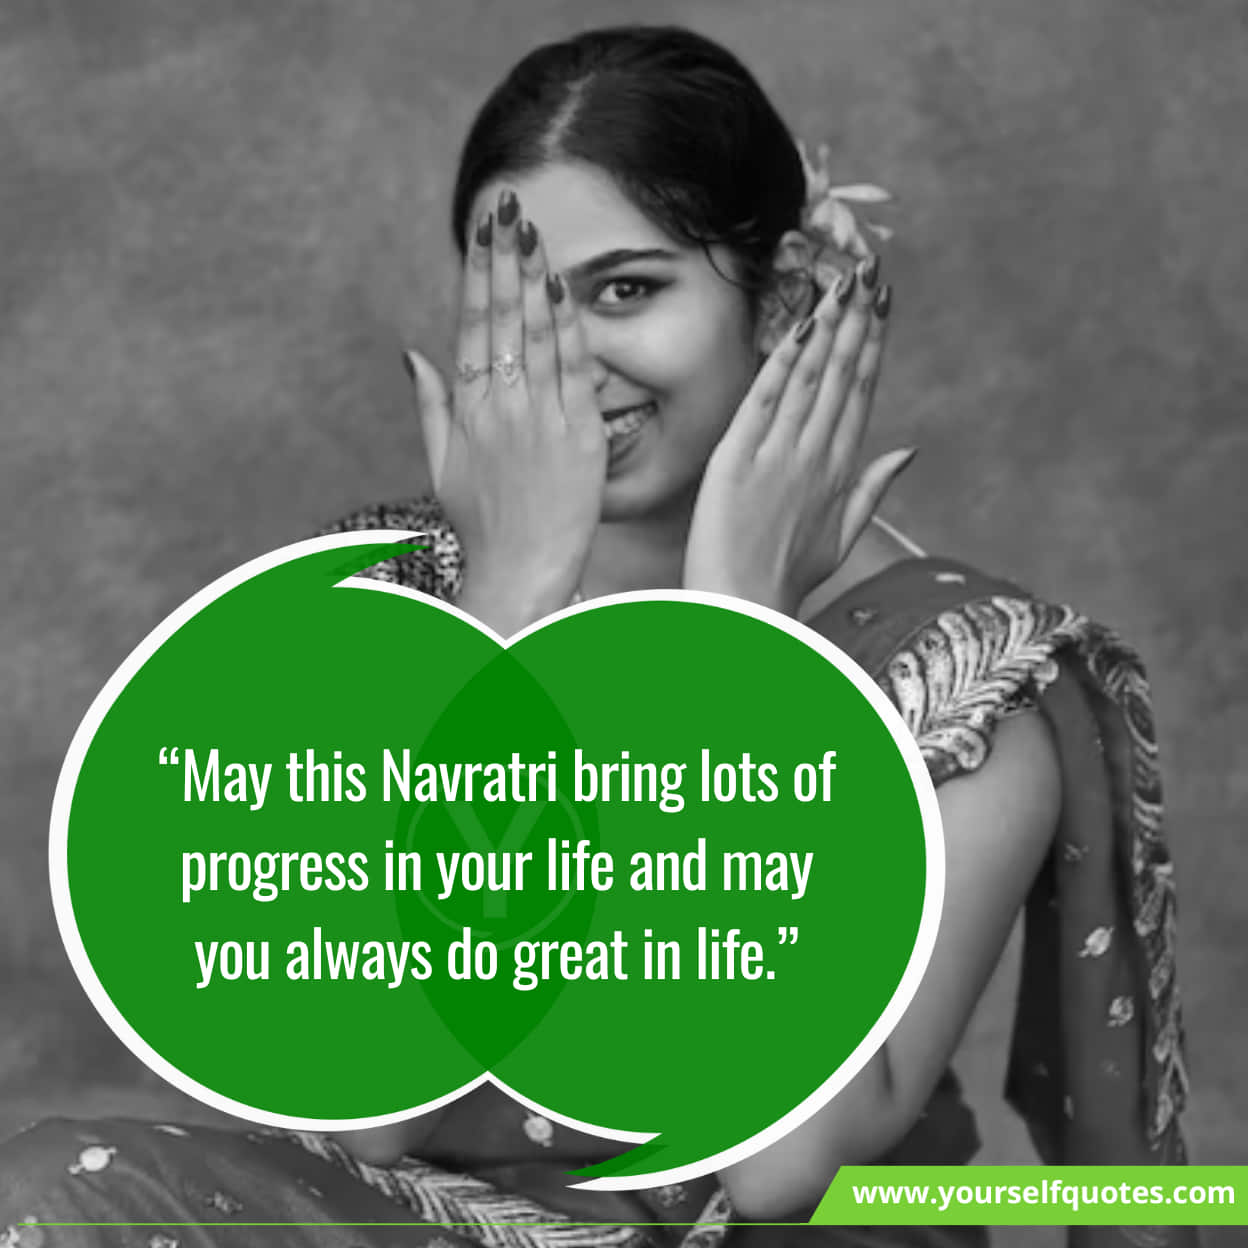 Happy Navratri wishes and messages